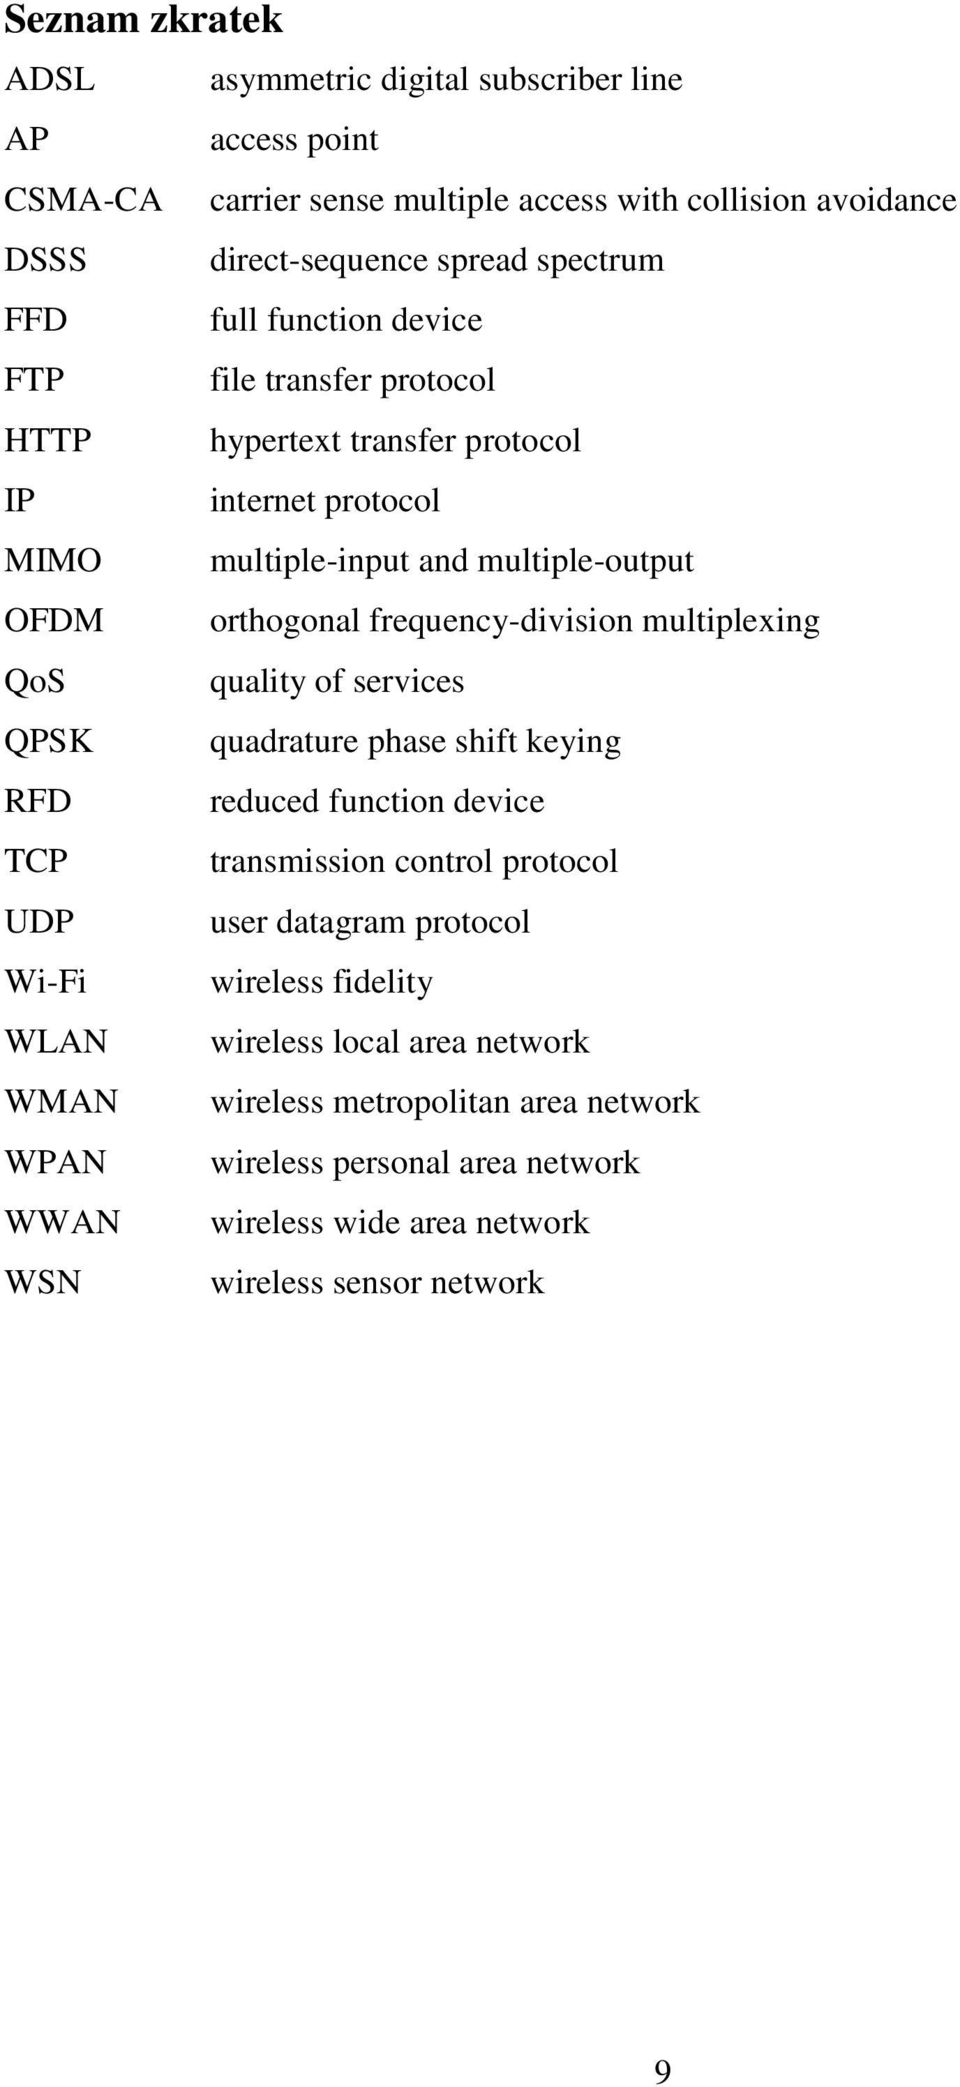 multiplexing QoS quality of services QPSK quadrature phase shift keying RFD reduced function device TCP transmission control protocol UDP user datagram protocol Wi-Fi wireless